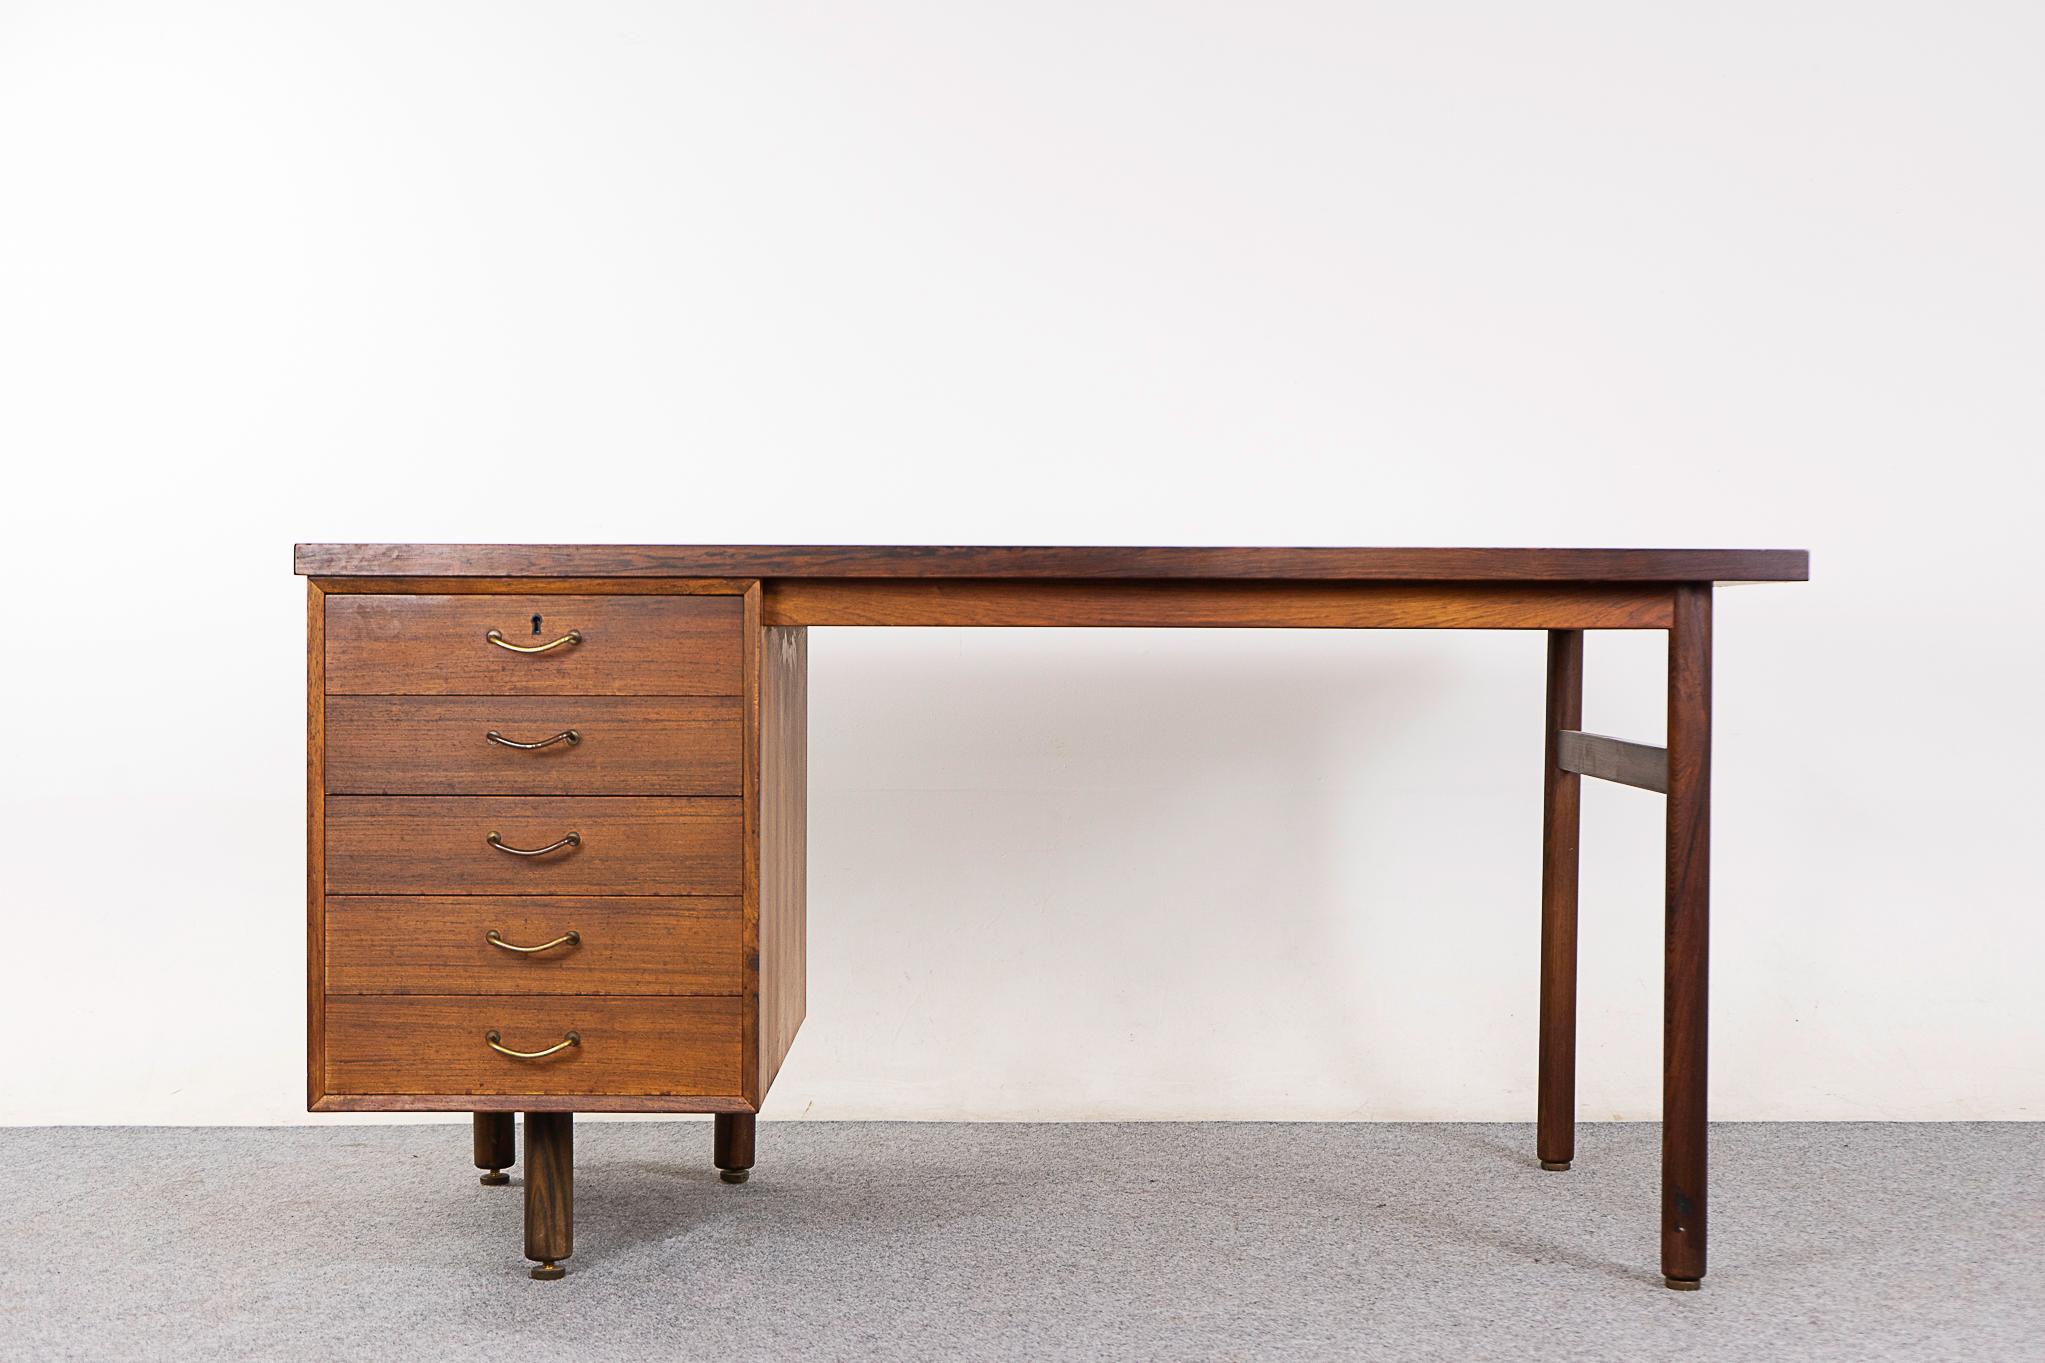 Rosewood Danish desk, circa 1960's. Unique 5 legged design with metal pulls and a bank of drawers that all lock at the same time from the top! Finished on both sides, if placed in the center of a room it will look fantastic from every angle. 